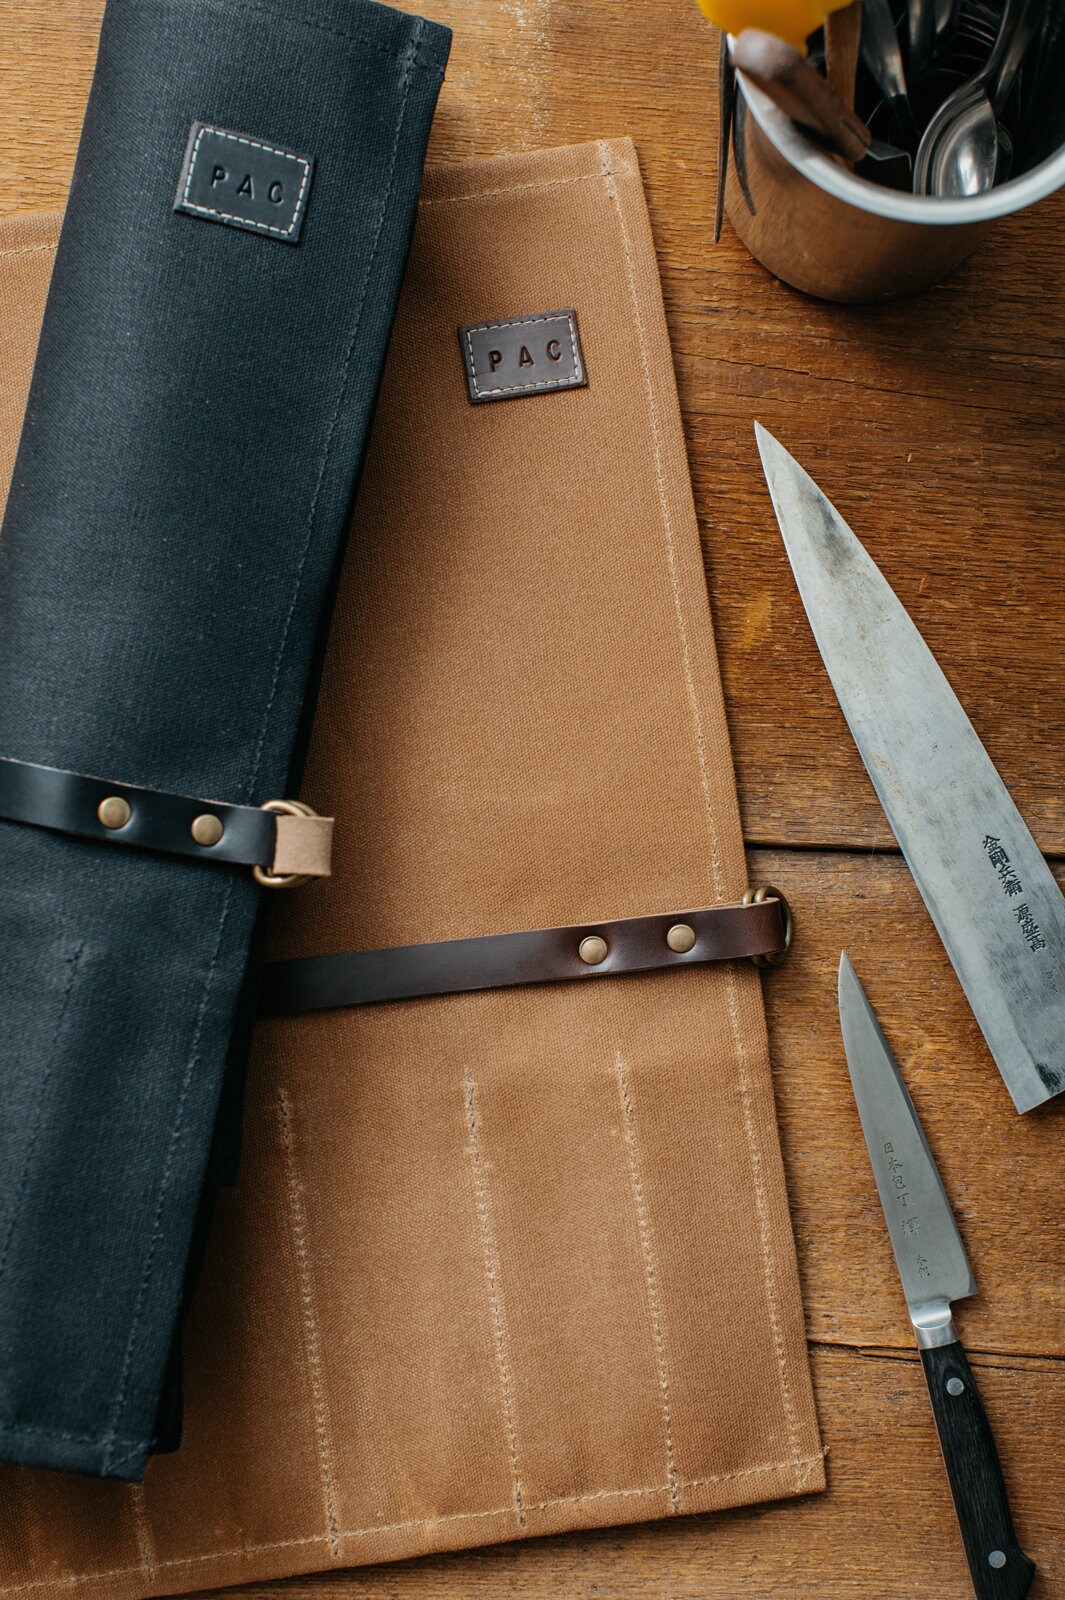 Waxed Canvas Basic Chef Knife Roll by Chef Sac